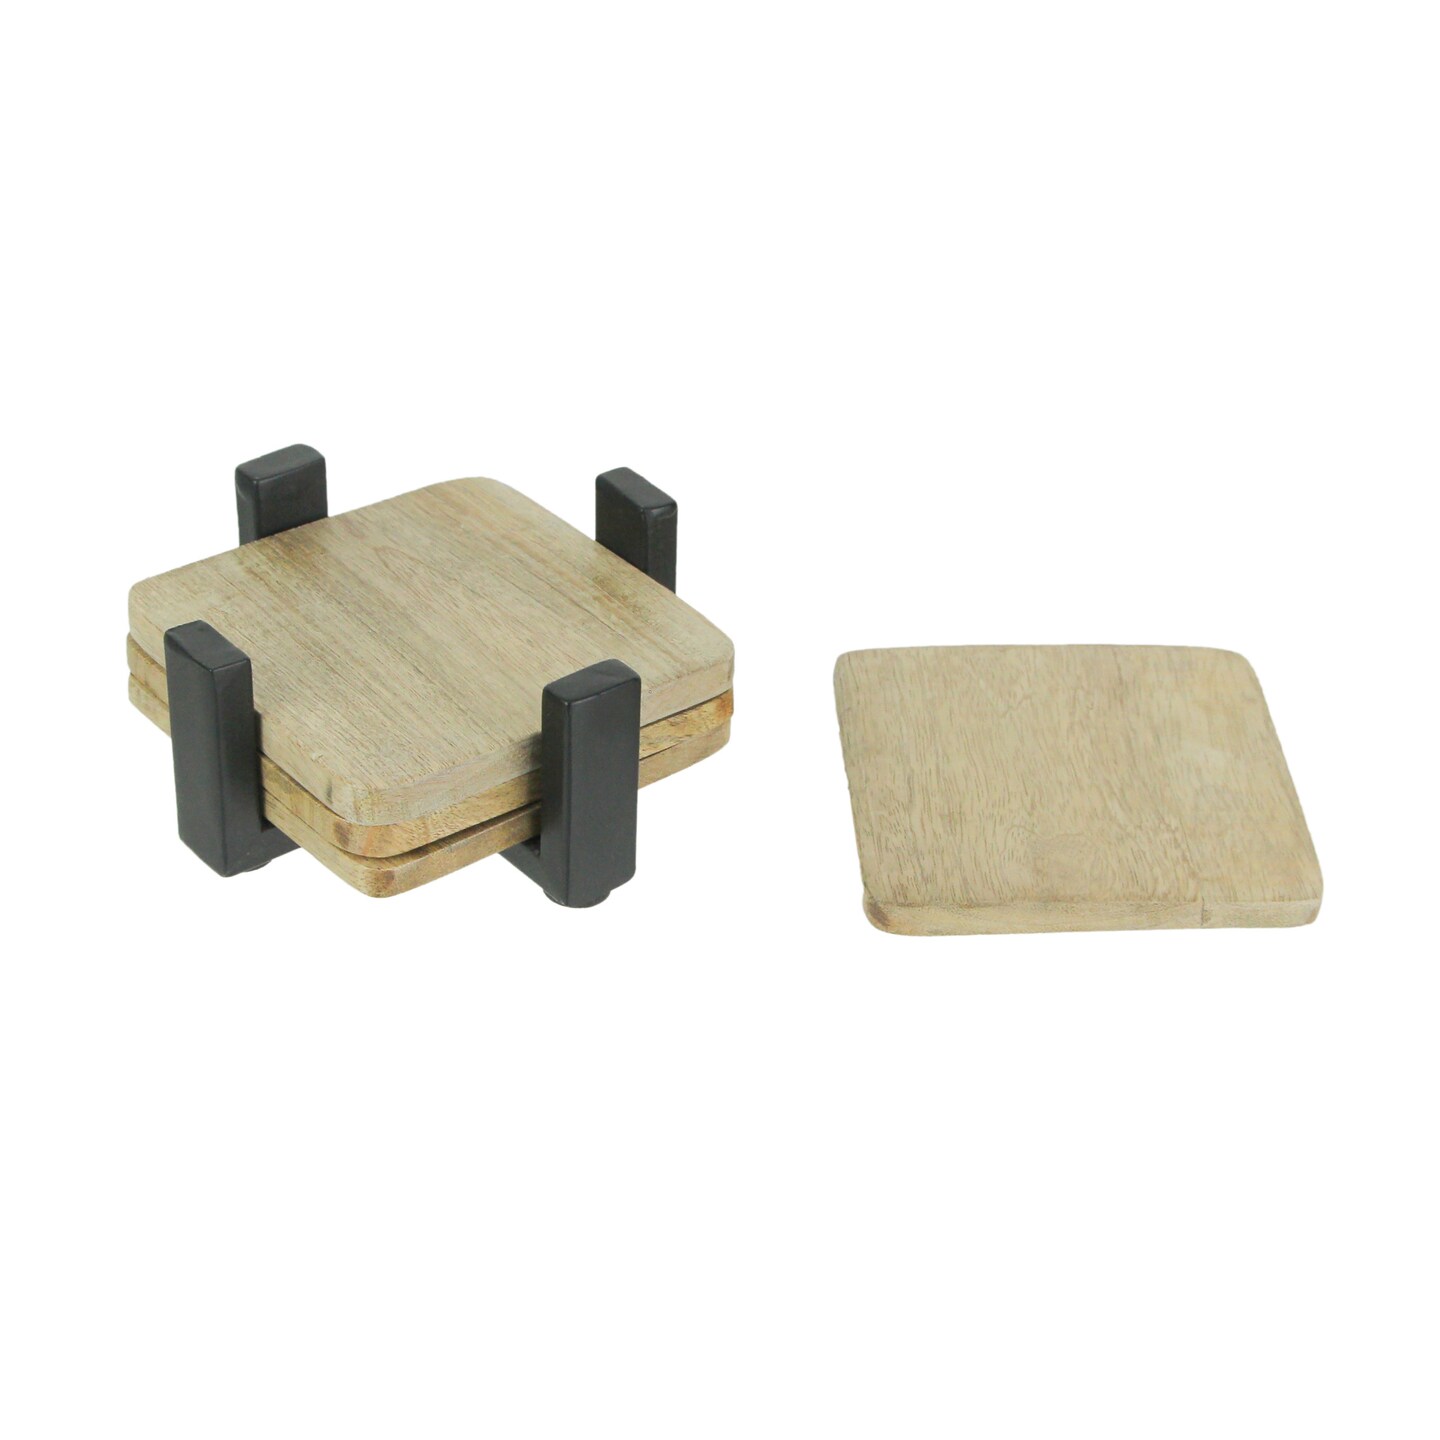 Set of 4 Wood Square Coasters Metal Holder Rustic Home Decor Drink Cup Accessory